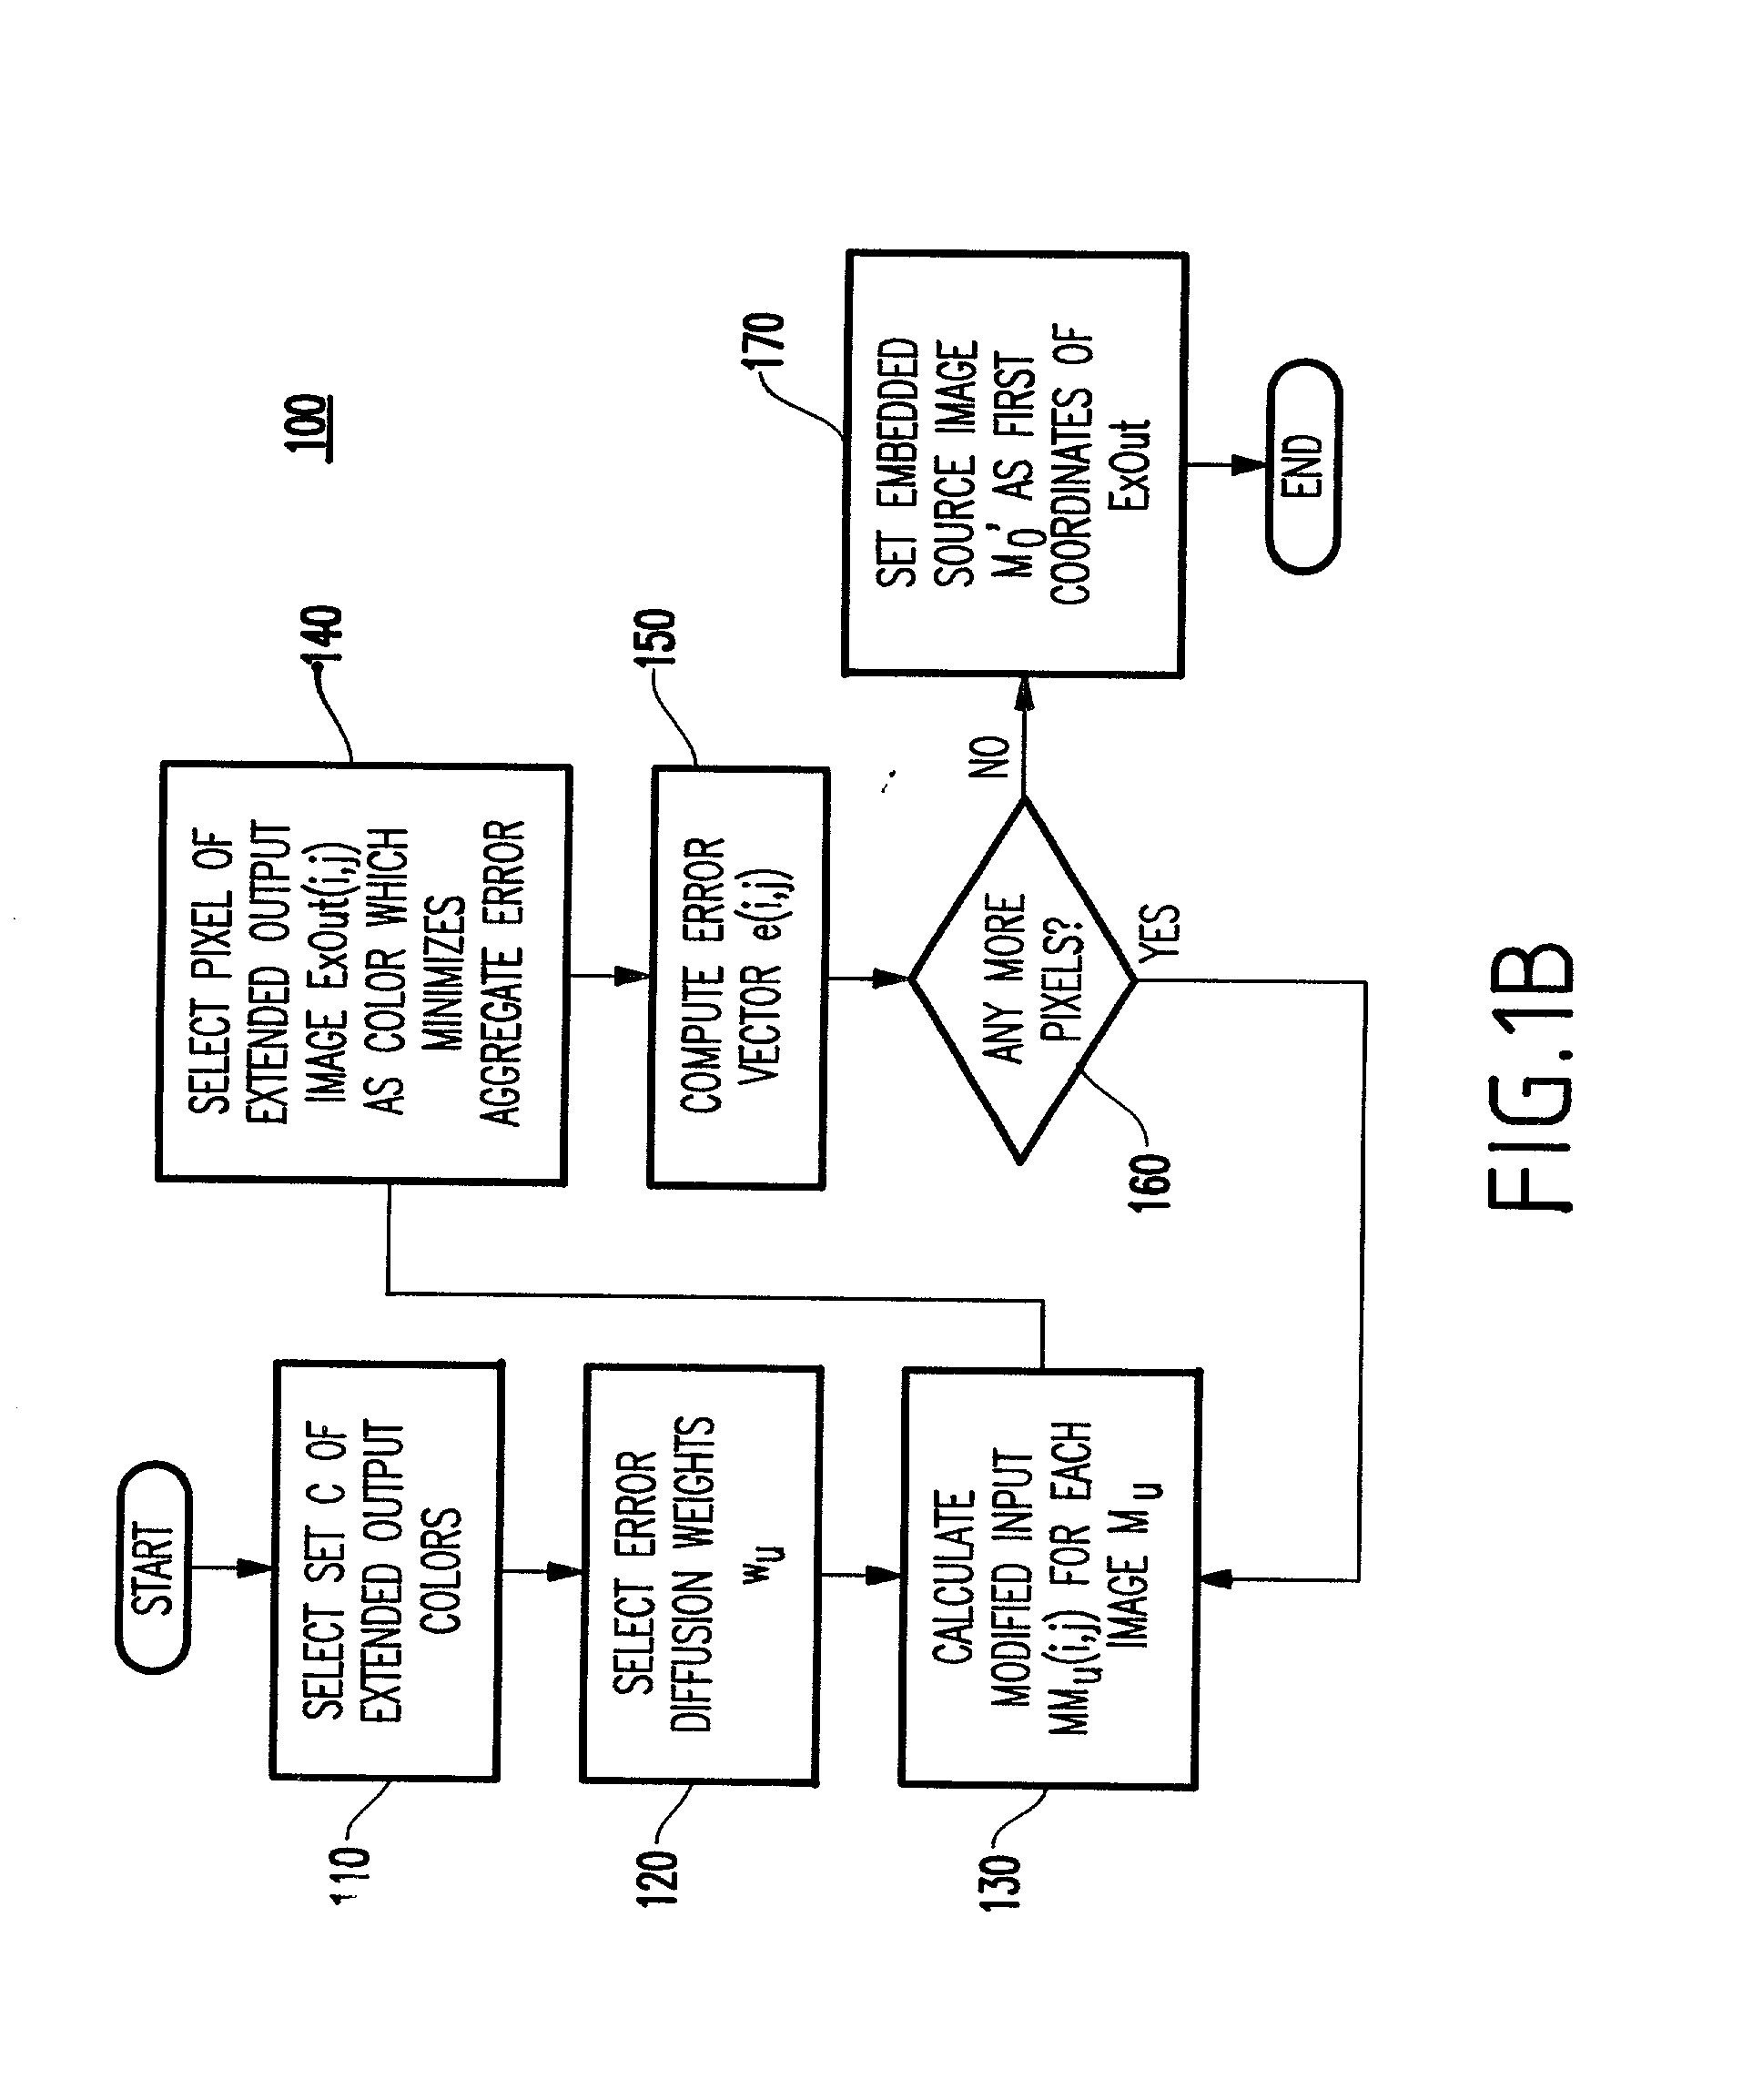 Method and system for data hiding and authentication via halftoning and coordinate projection